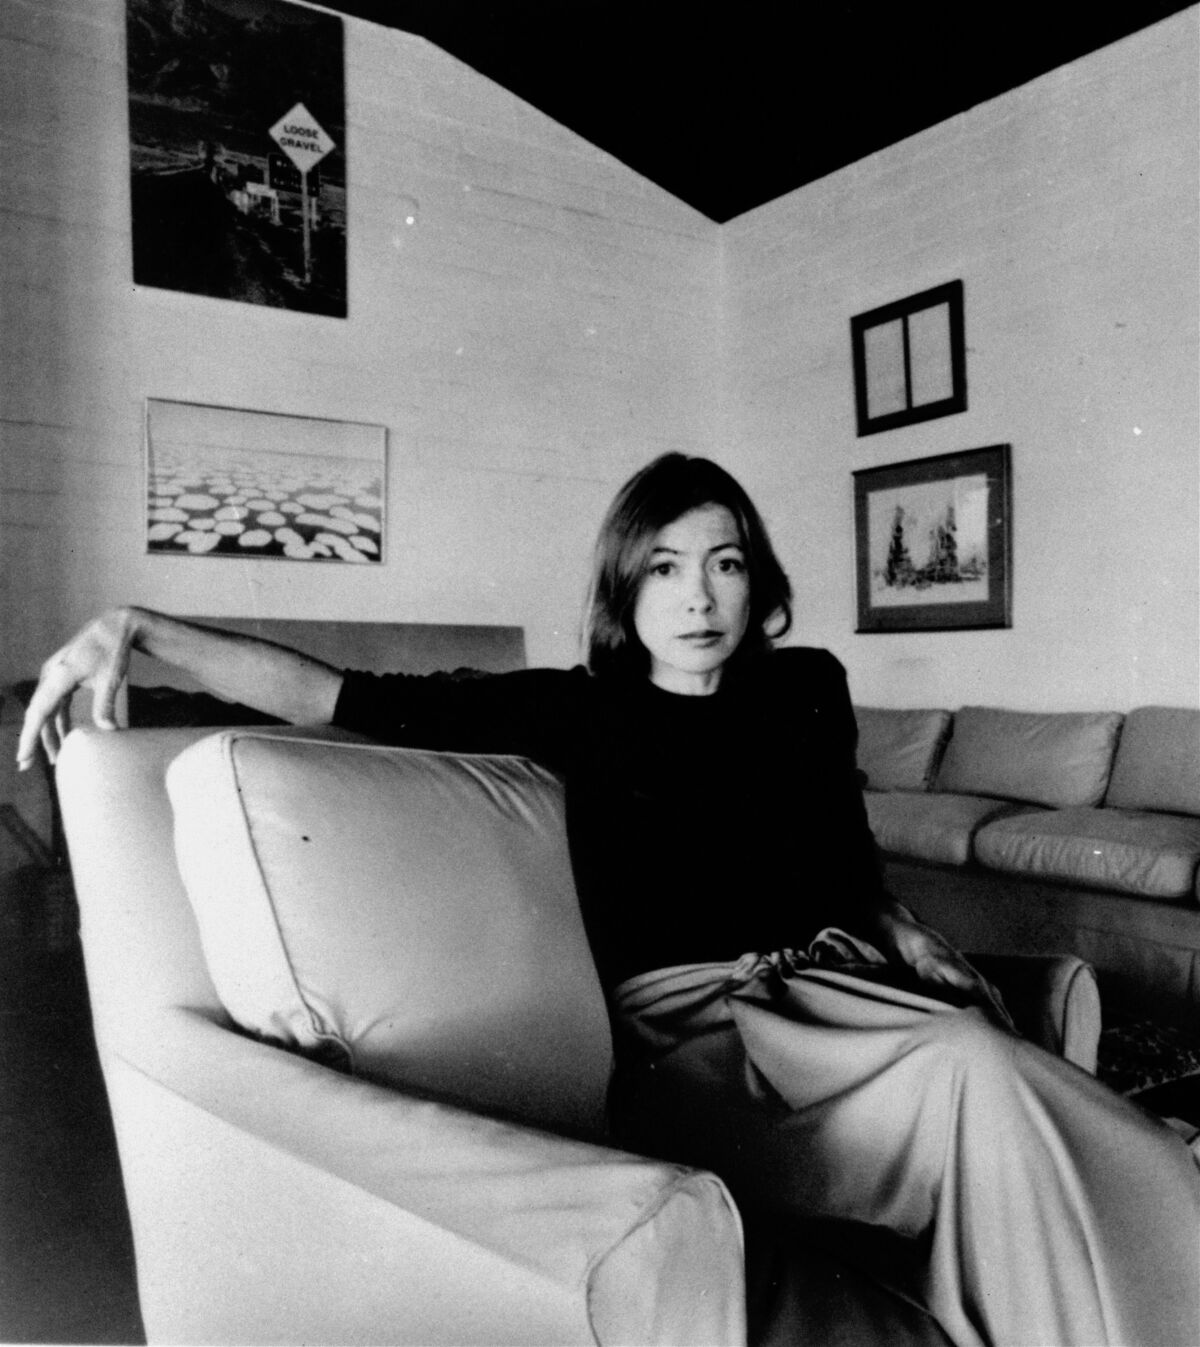 Joan Didion sits on a sofa in this black-and-white photo taken on May 1, 1977.